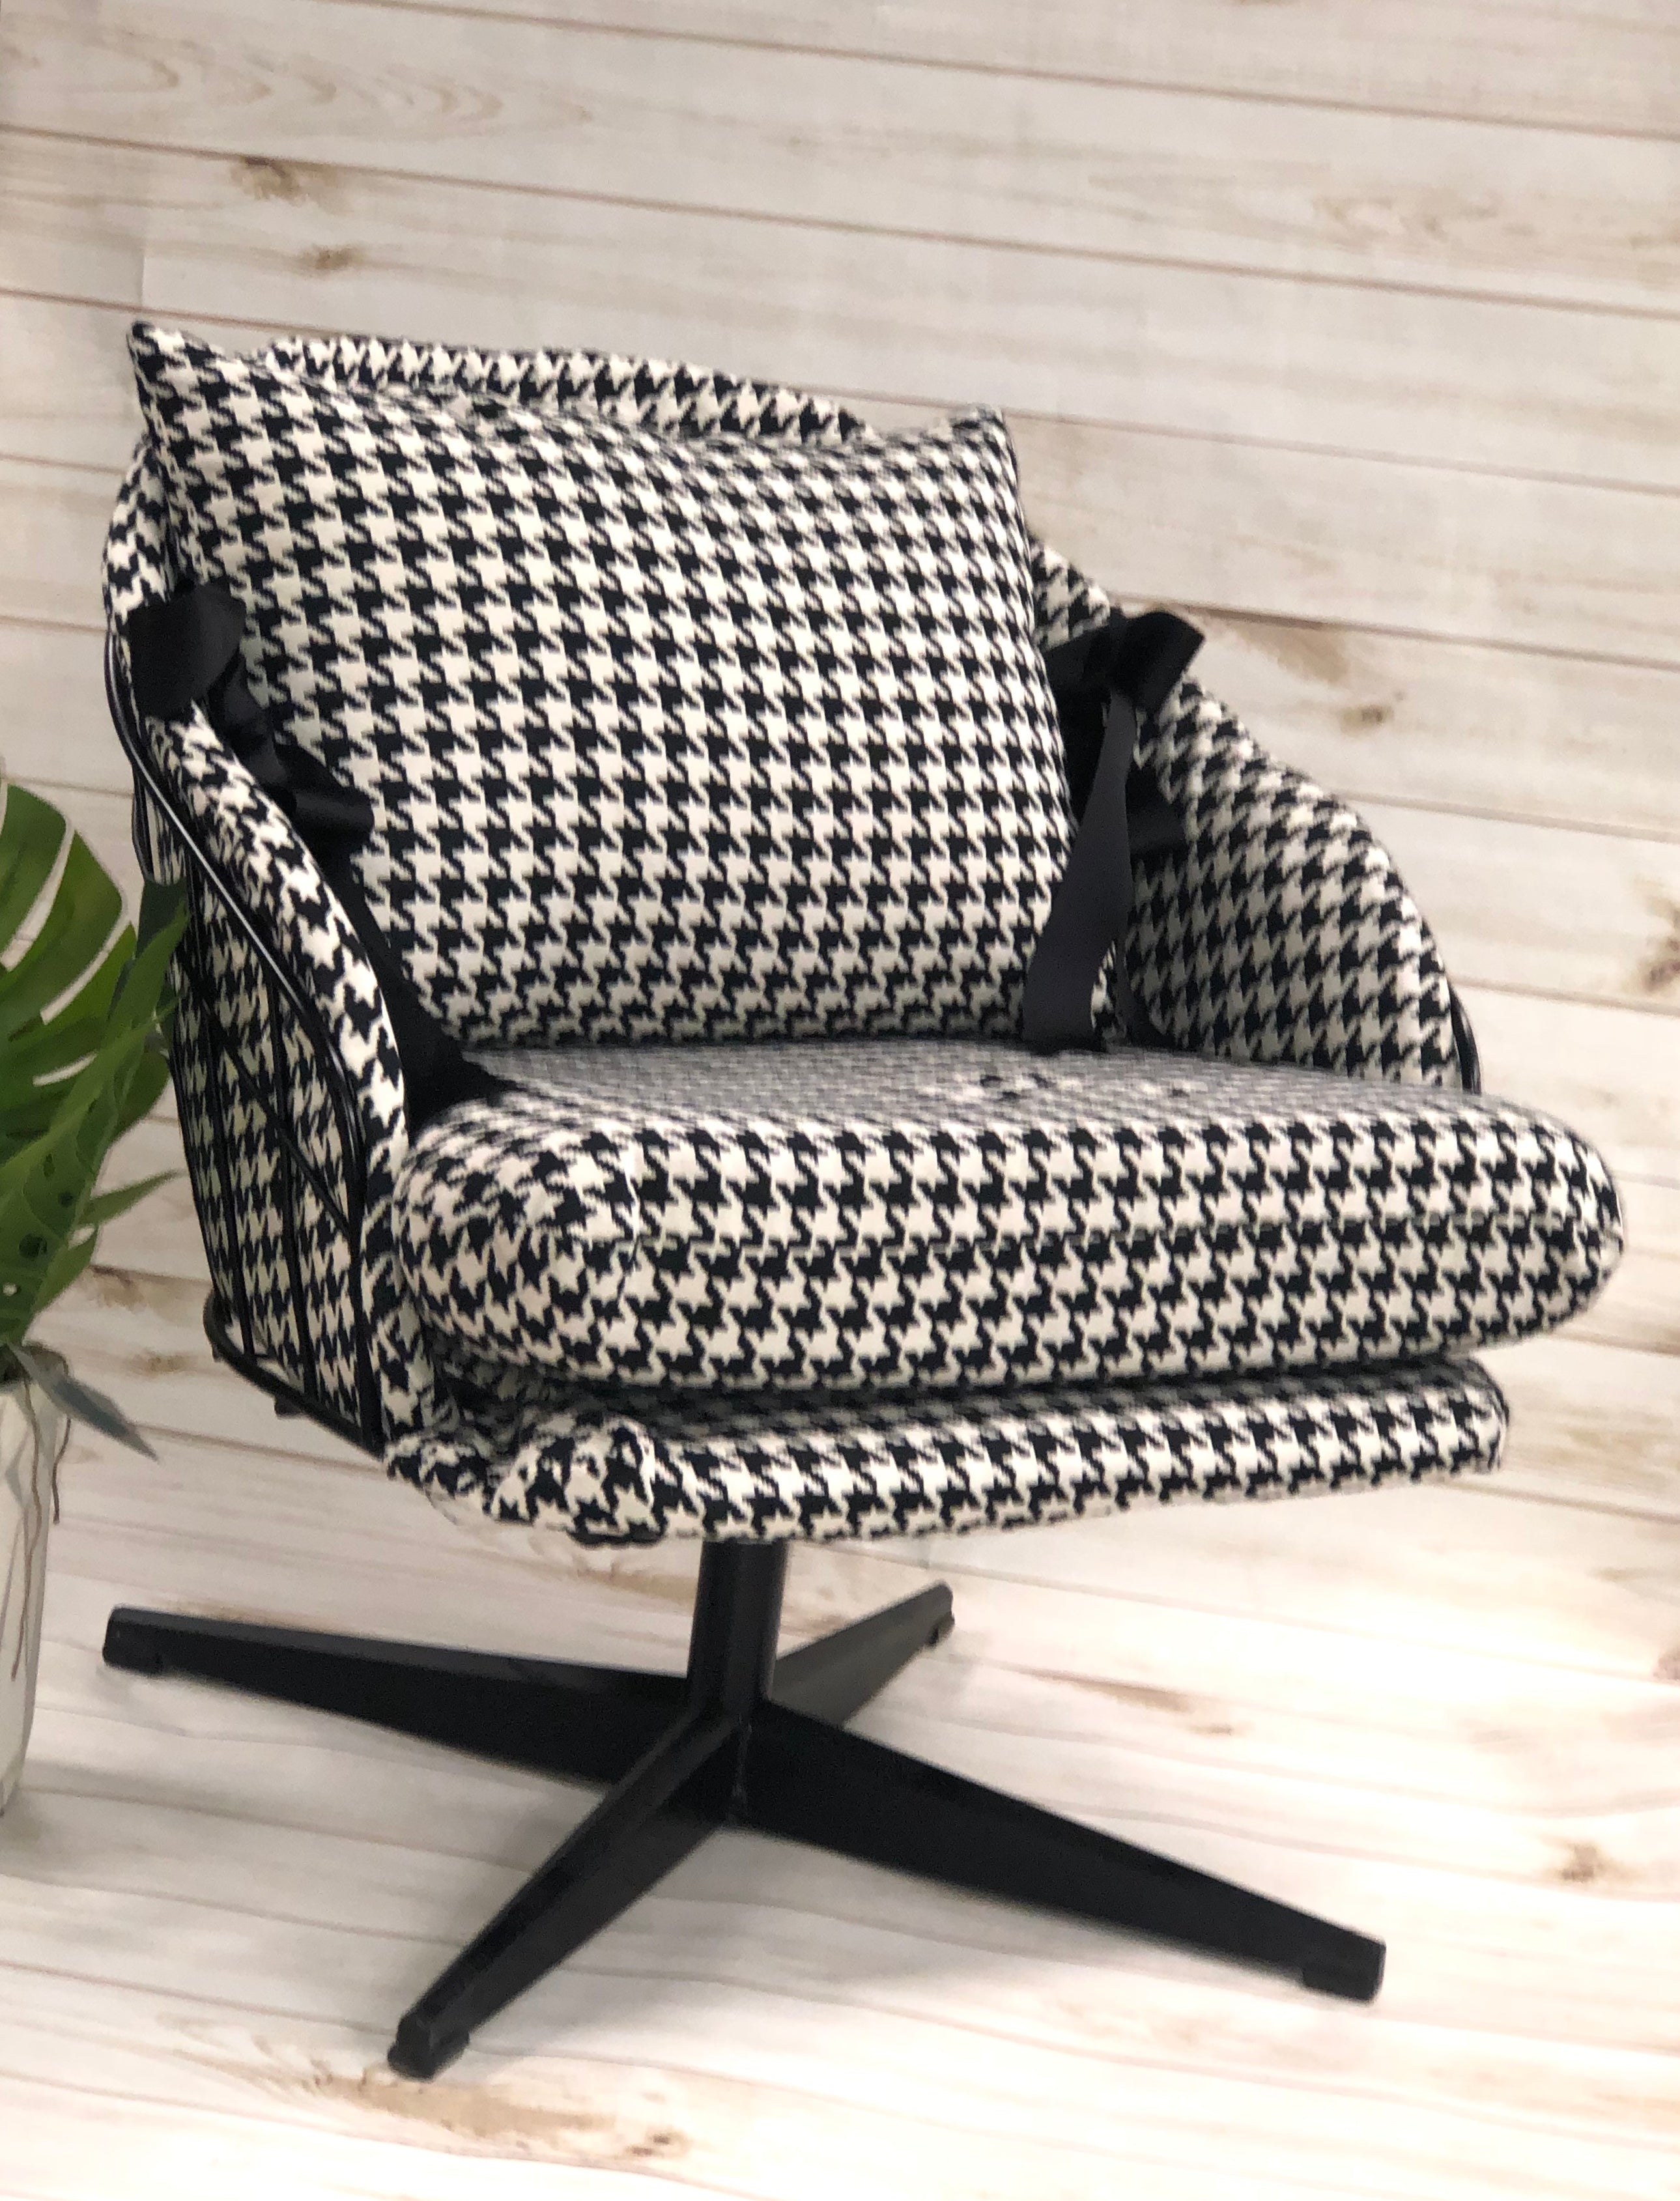 Retro Chair & Ottoman - 2pc. Houndstooth